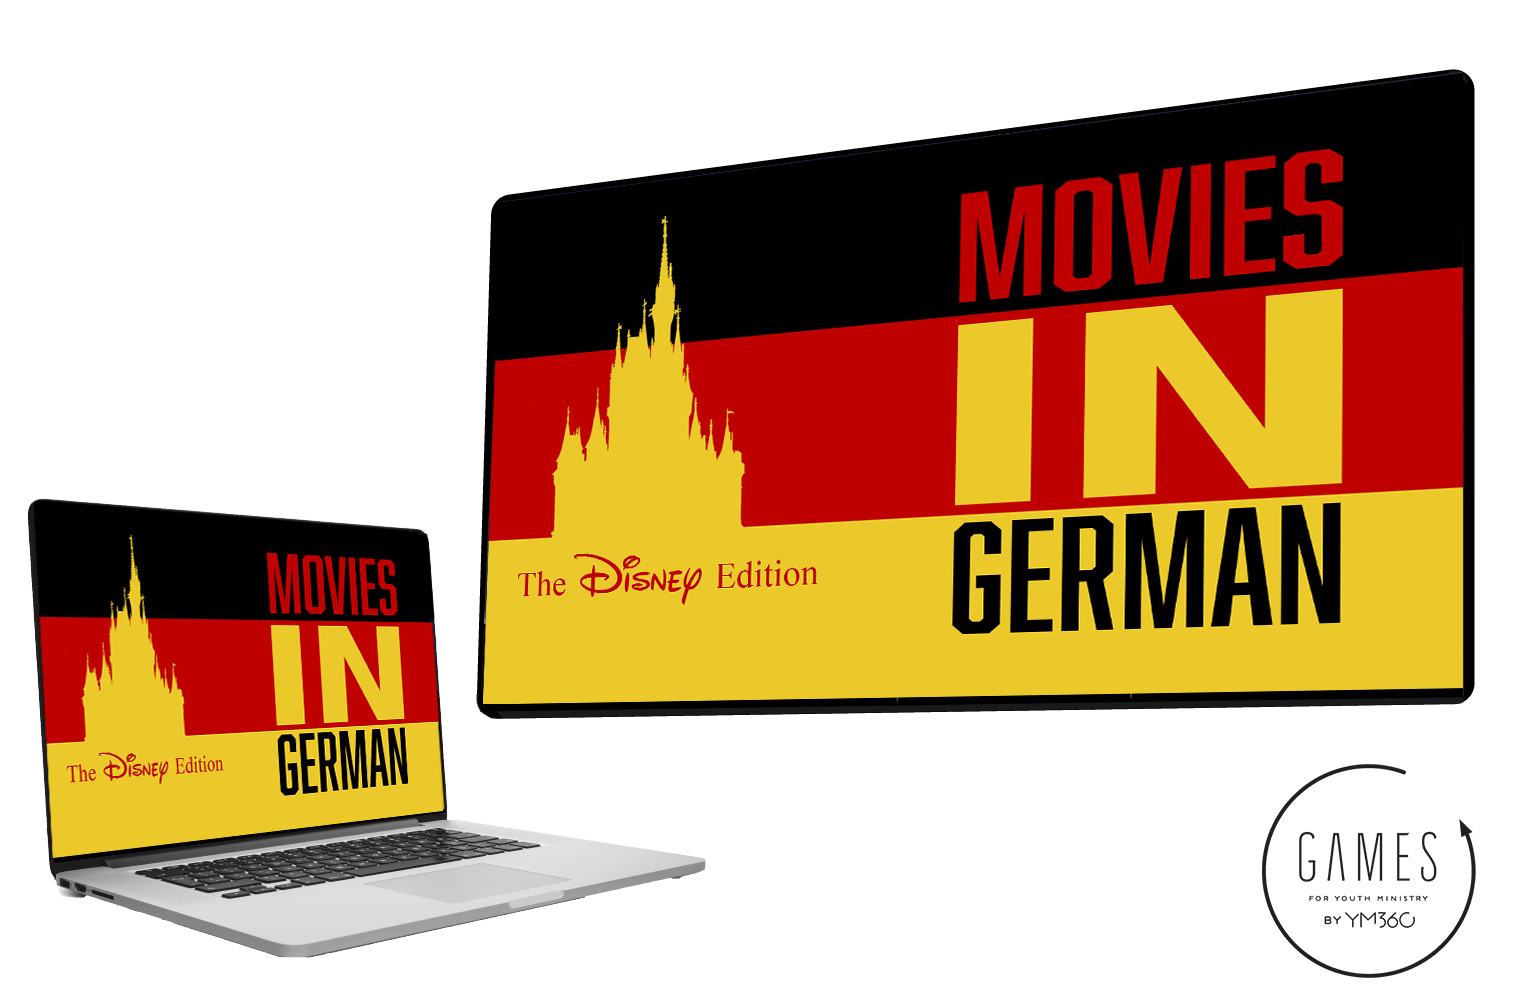 Movies in German: The Disney Edition